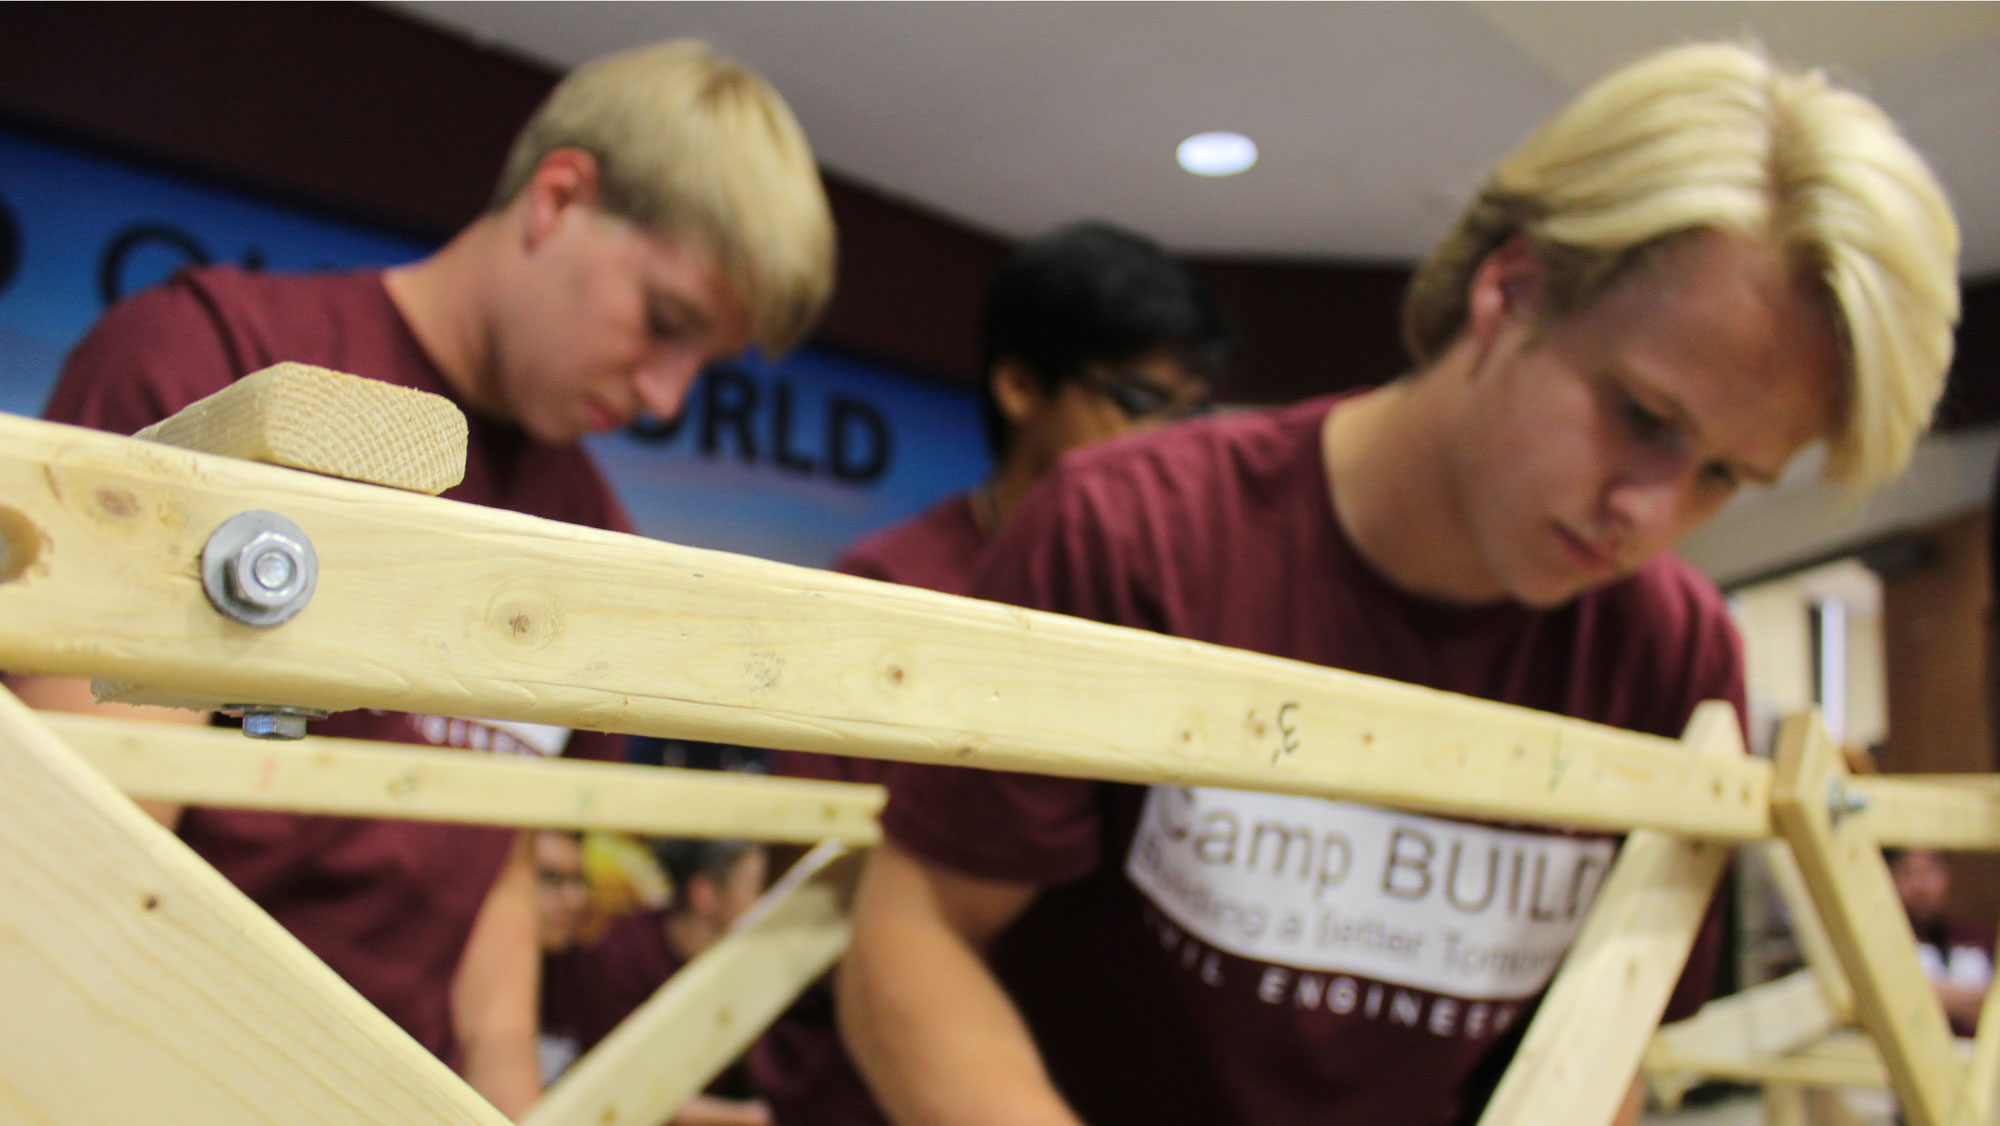 Students work during the Camp BUILD event on bridge construction.